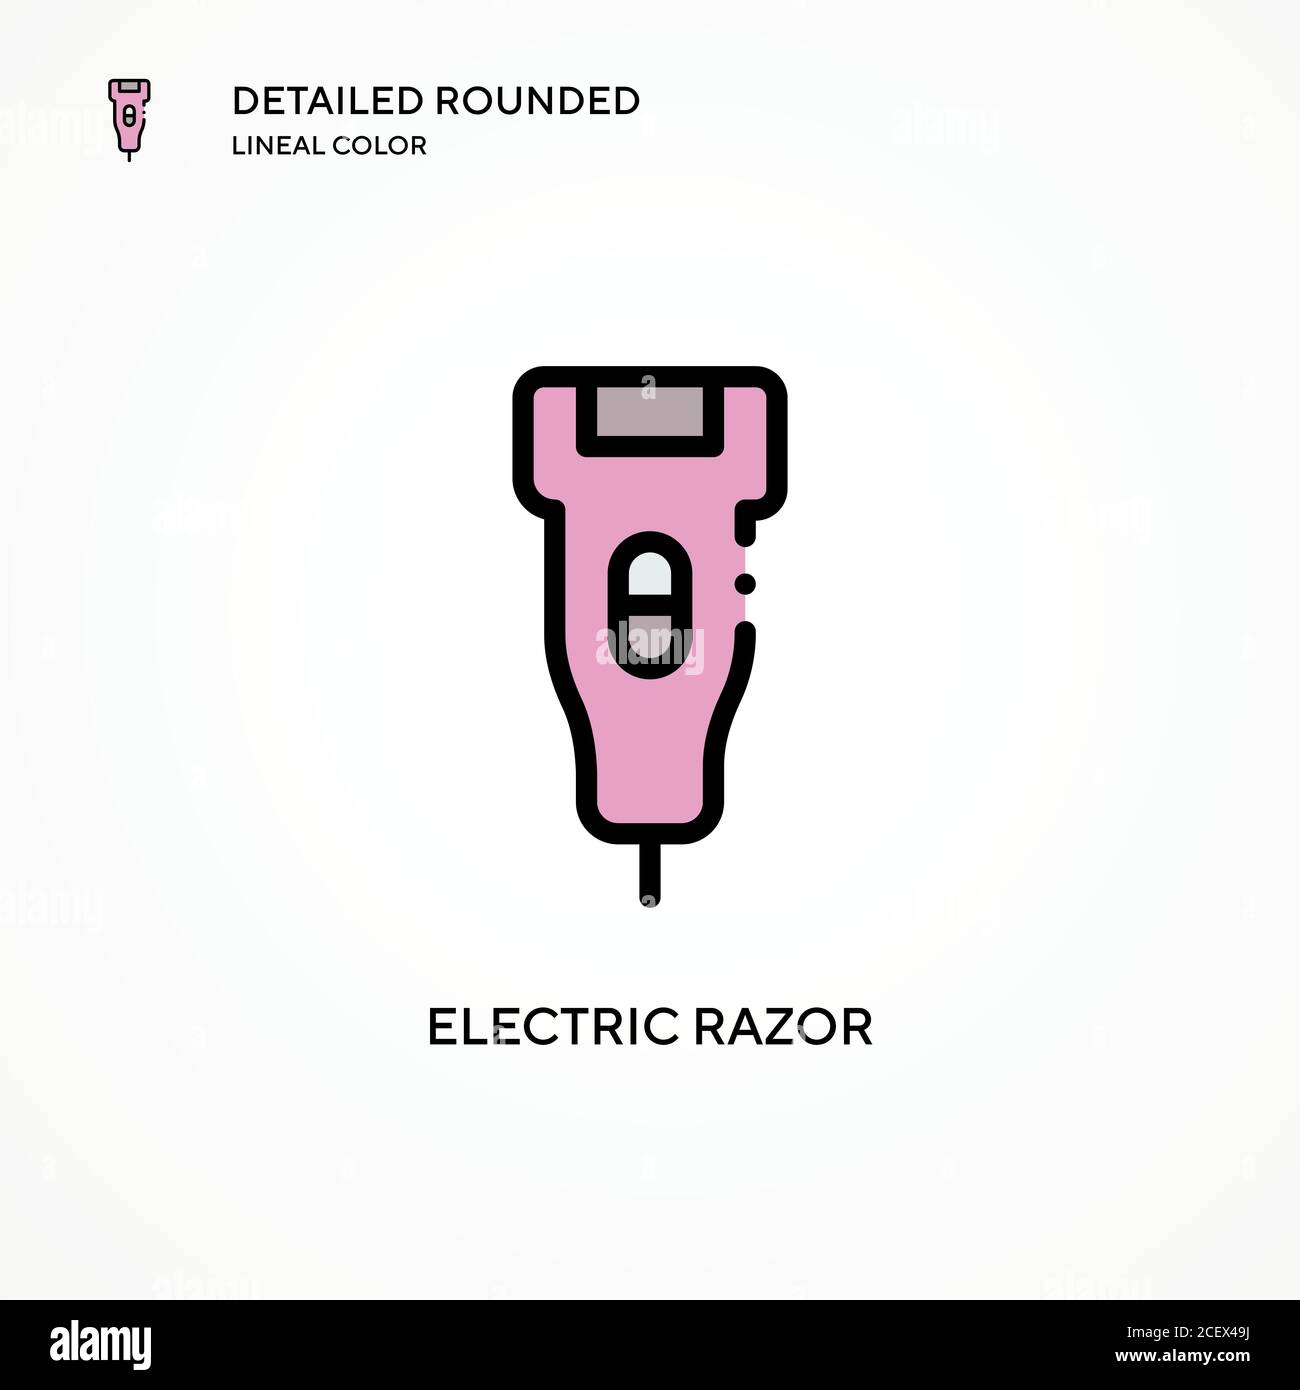 Electric razor vector icon. Modern vector illustration concepts. Easy to edit and customize. Stock Vector